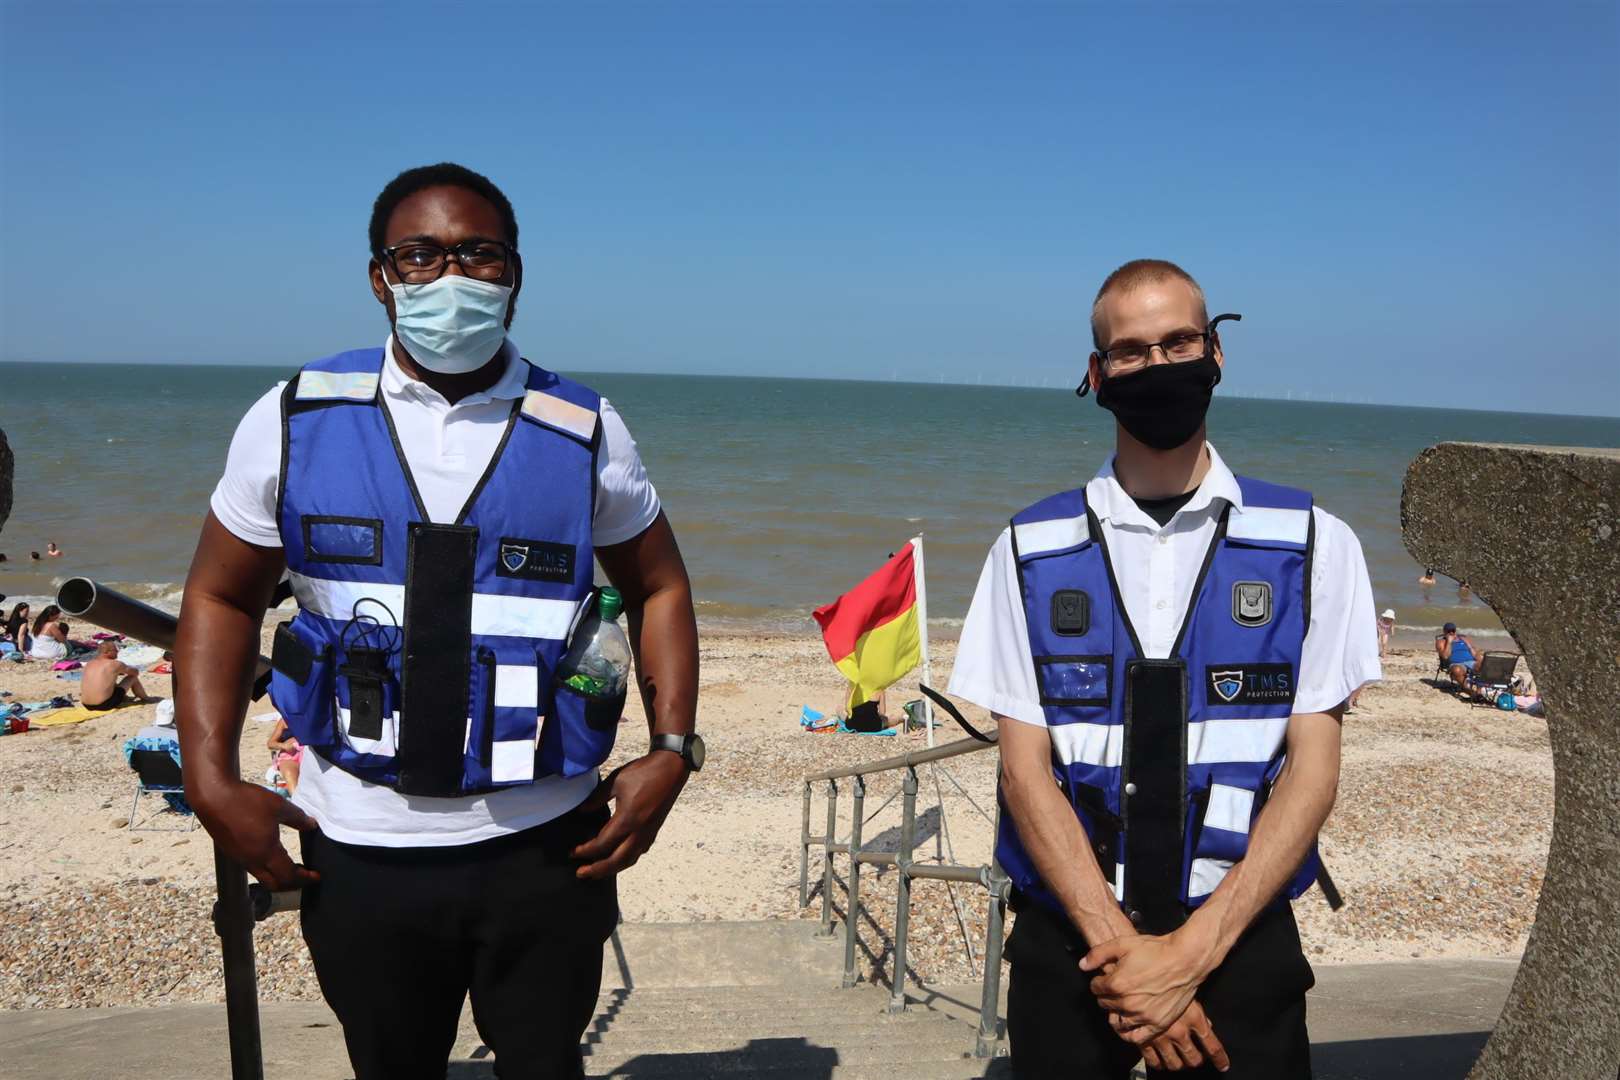 The Covid-busters - Swale council's Covid marshals Prince Asuming, left, and Peter Broome on the beach at Leysdown